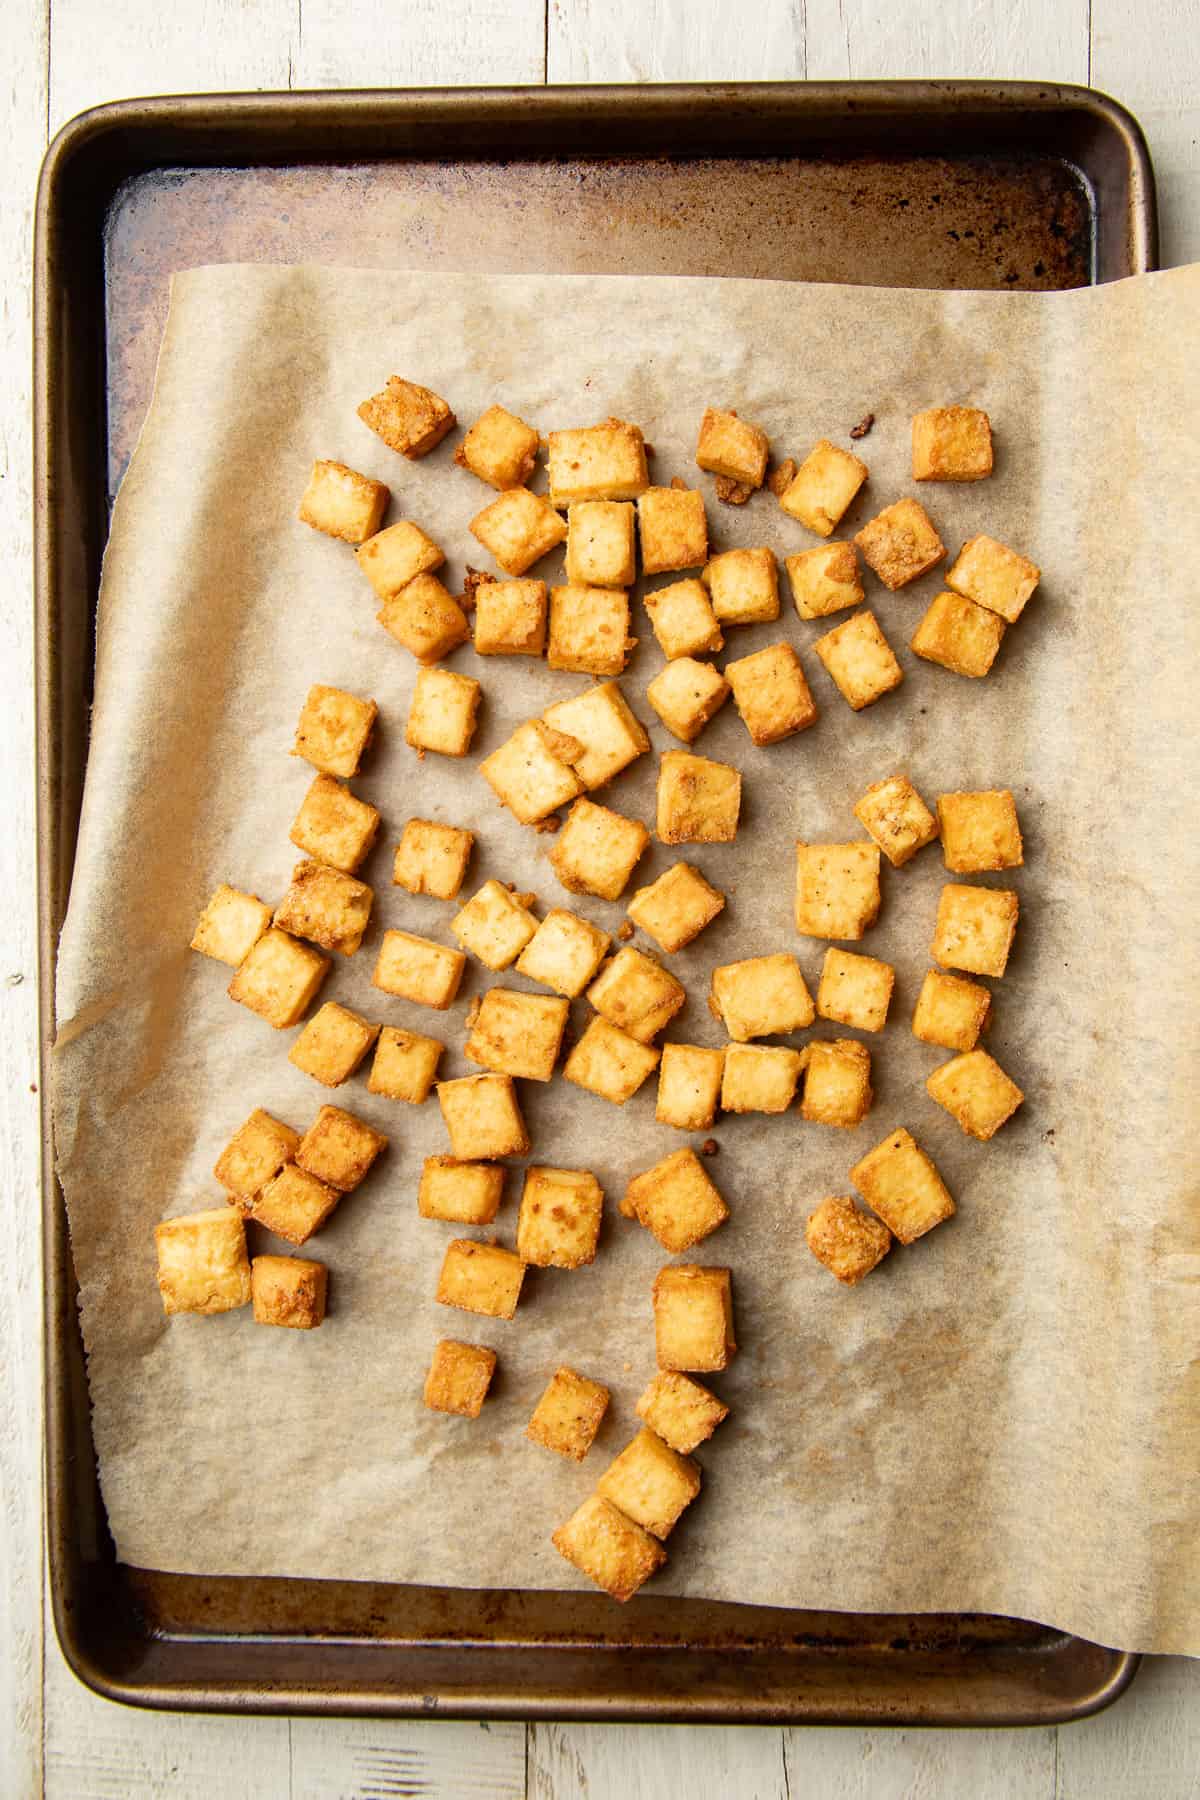 Baked tofu cubes on a parchment paper-lined baking sheet.